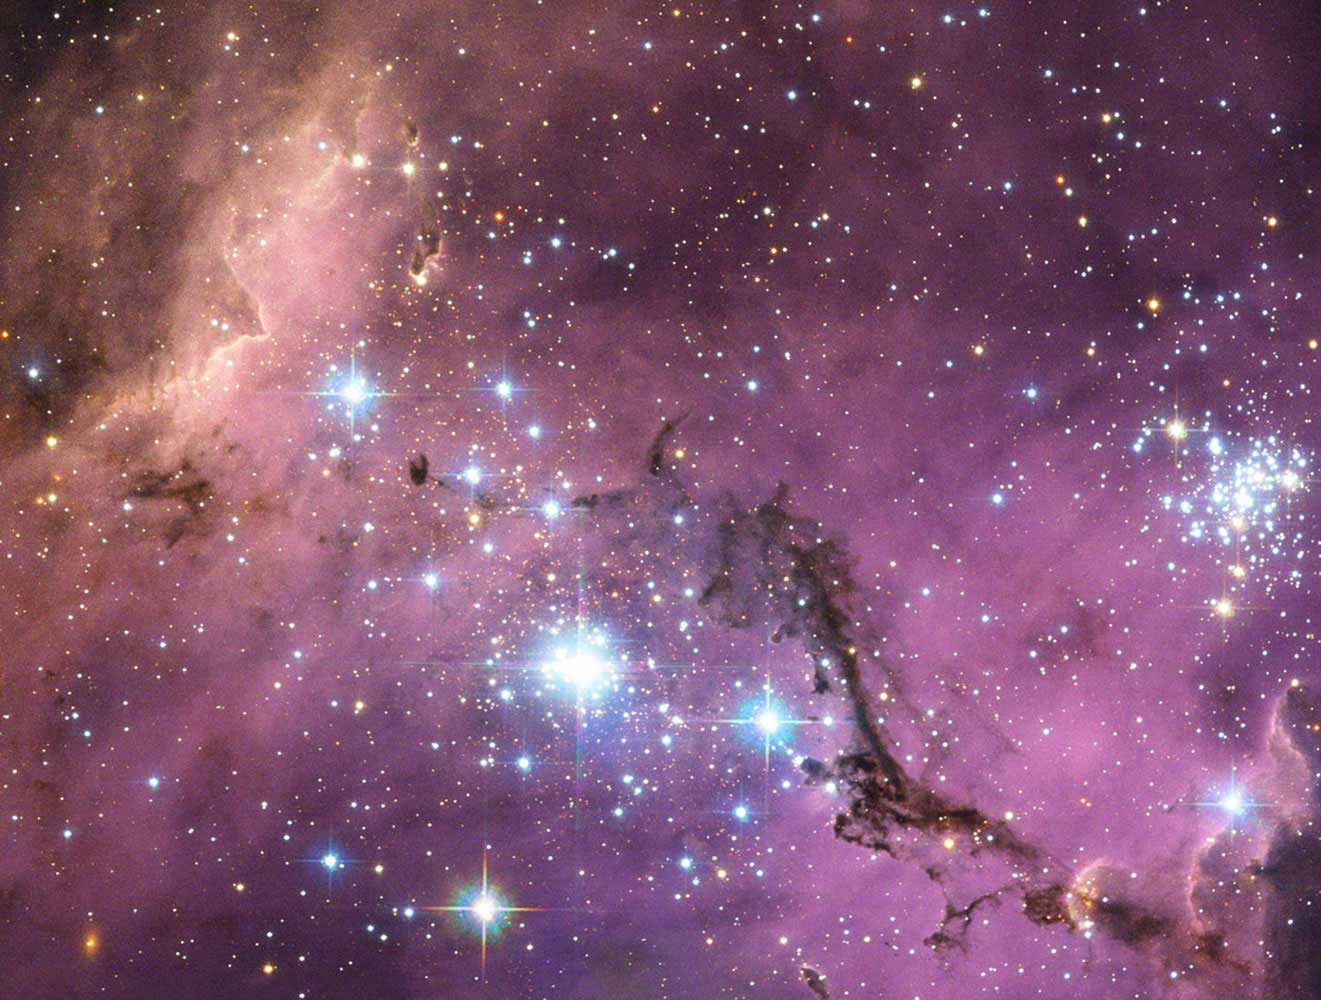 Nearly 200, 000 light-years from Earth, lies the Large Magellanic Cloud, a satellite galaxy of the Milky Way. As the Milky Way's gravity gently tugs on its neighbor's clumps of diffuse dust and gas, they collapse to form new stars. In turn, these light up the ambient gas in a kaleidoscope of colors.